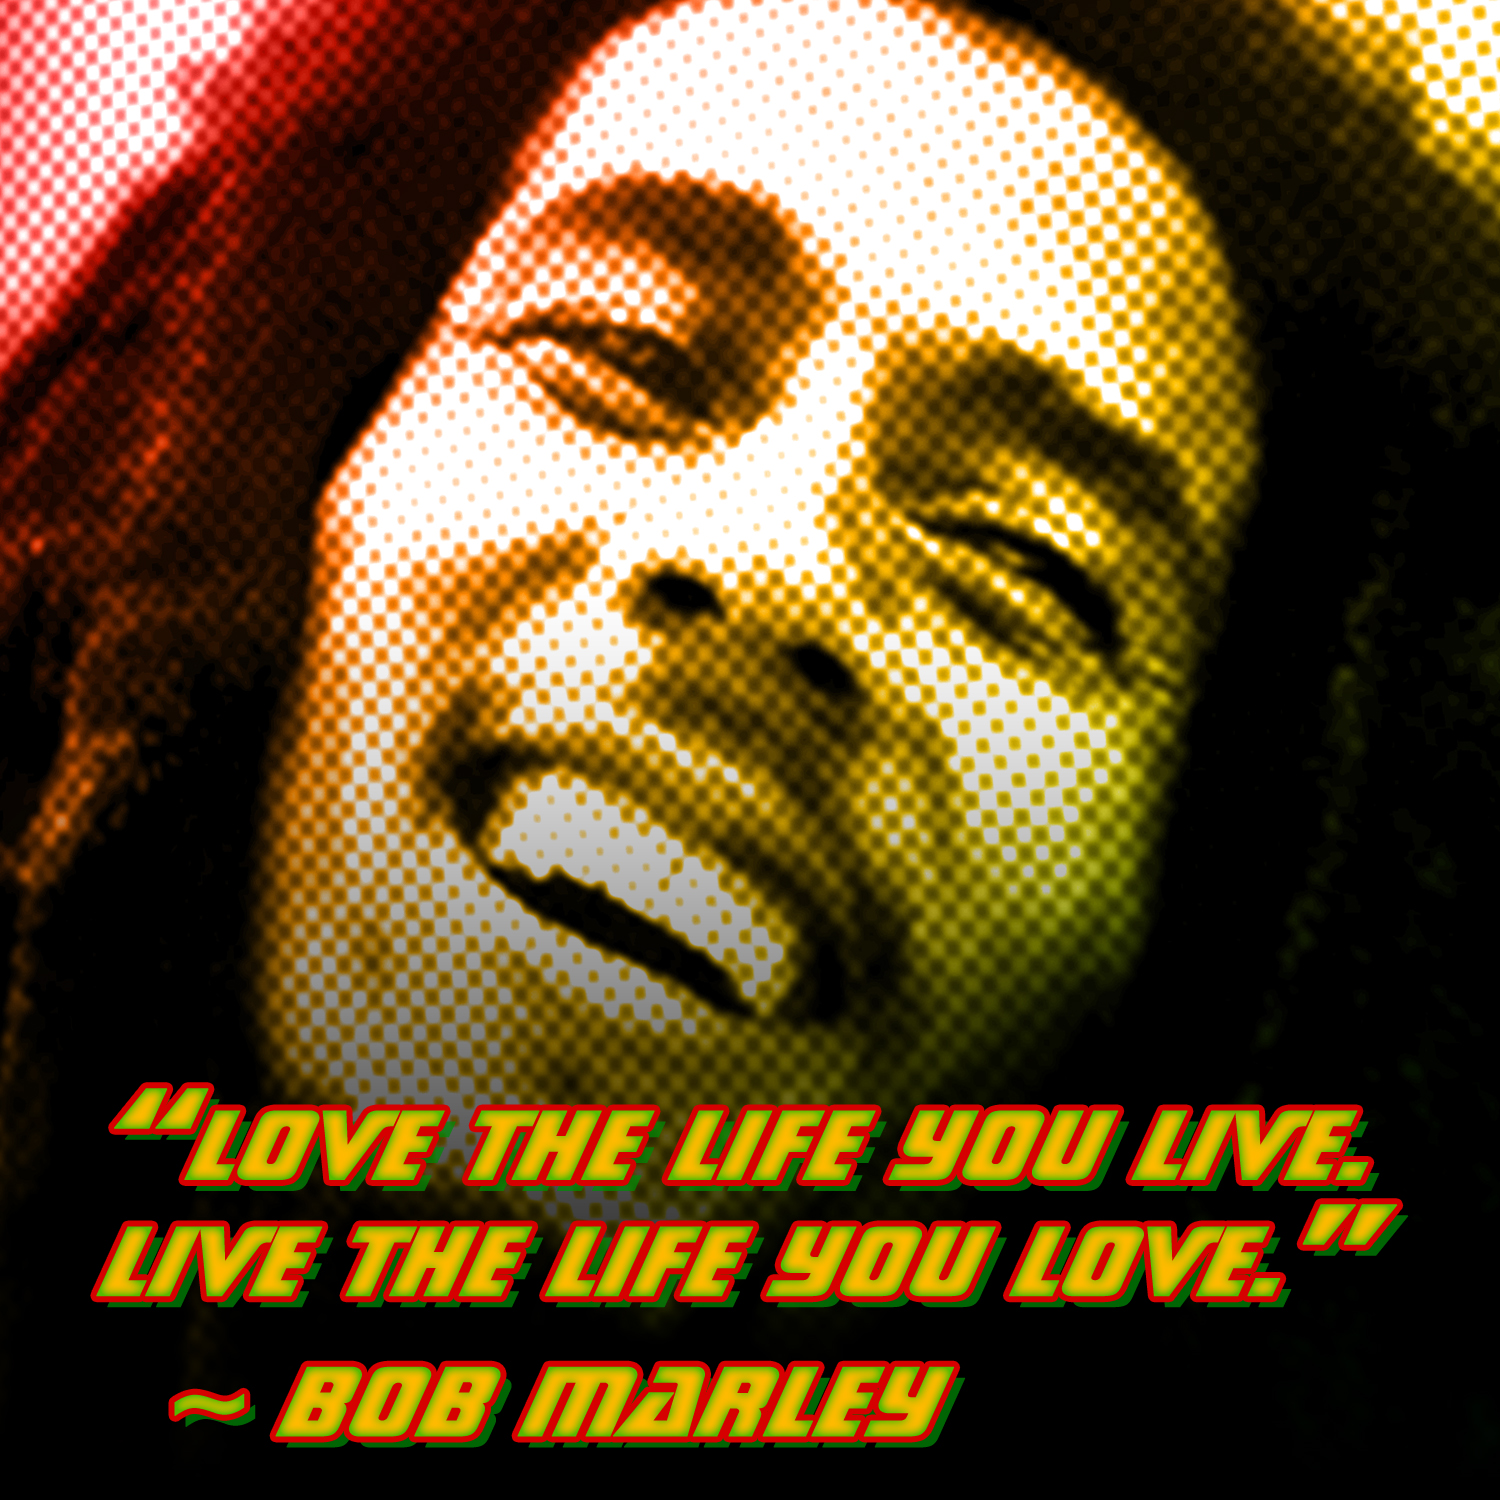 Bob Marley Quotes | Dictionary Quotes1500 x 1500